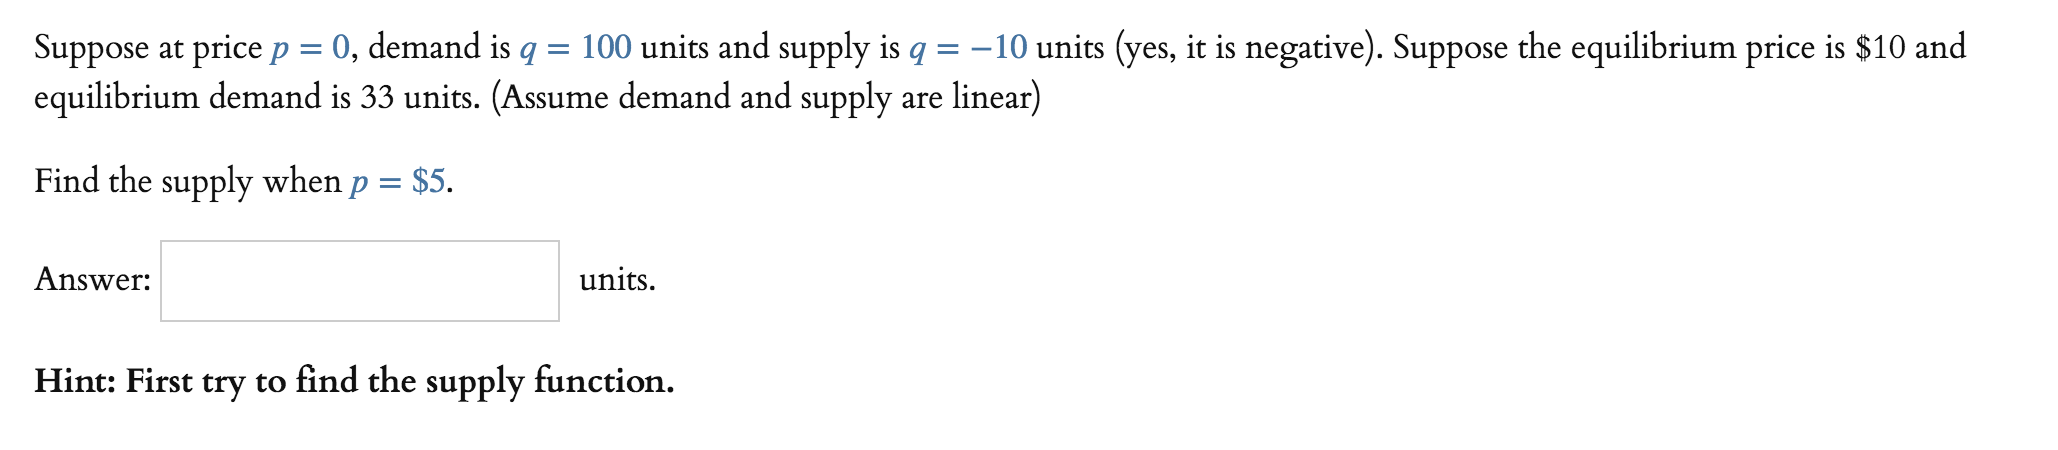 Suppose at price p = 0, demand is q = 100 units and supply is q =-10 units yes, it is negative). Suppose the equilibrium price is $10 and
equilibrium demand is 33 units. (Assume demand and supply are linear)
Find the supply when p Ss.
Answer:
units
Hint:
First try to find the supply function.
